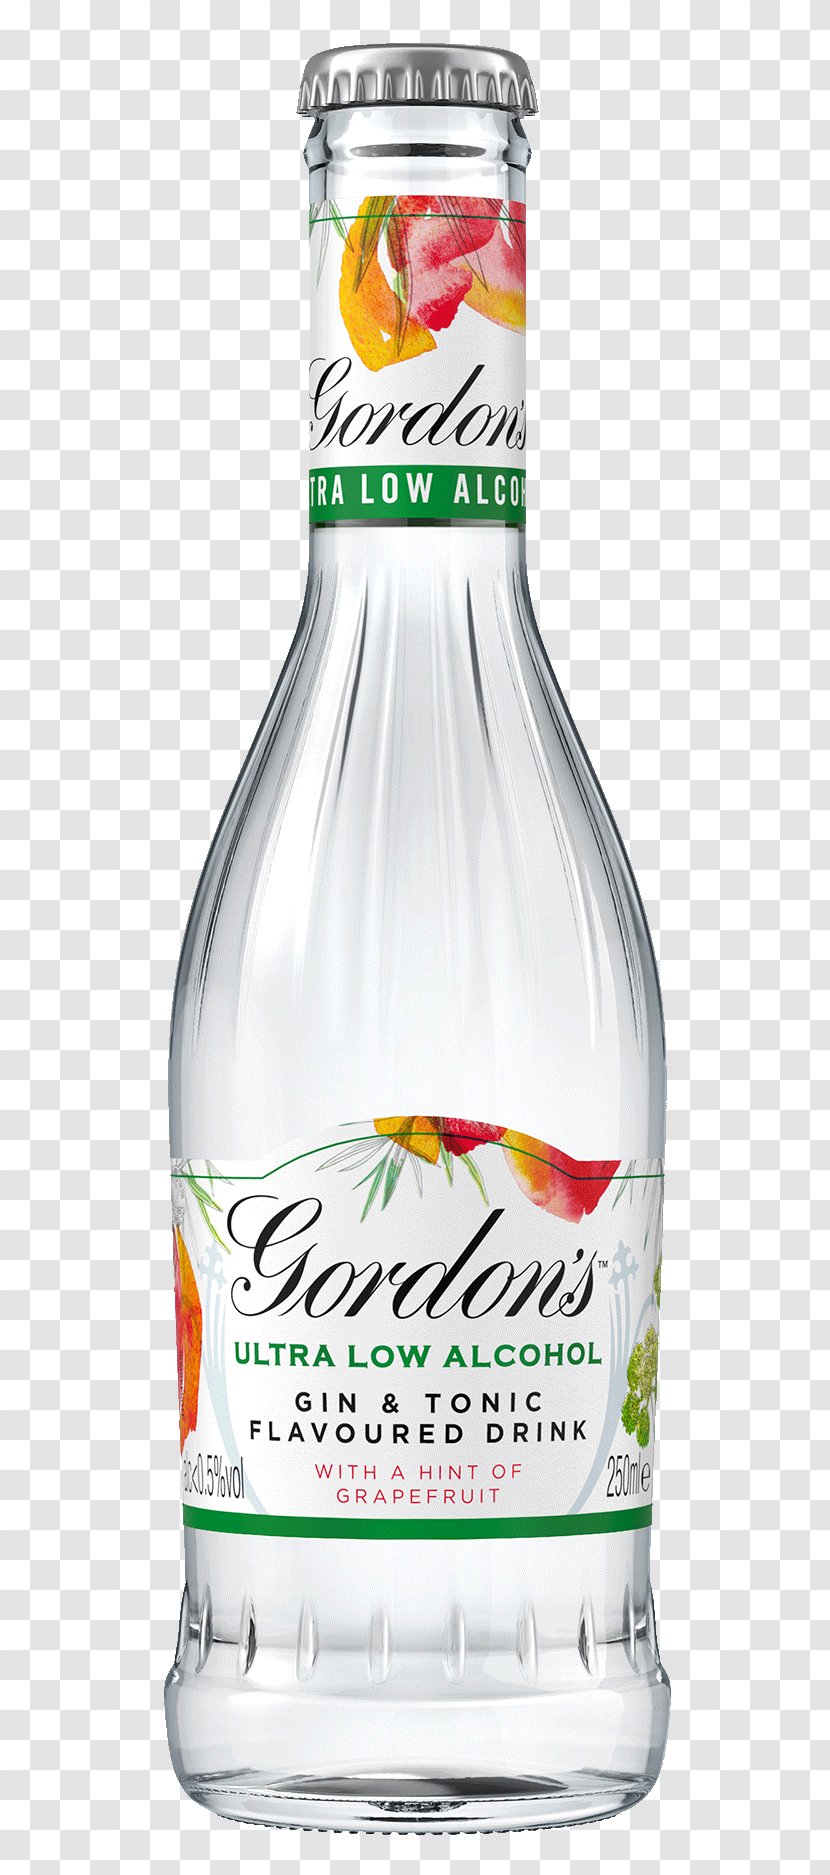 Gin And Tonic Water Non-alcoholic Drink Liquor - Glass Bottle - Beer Transparent PNG